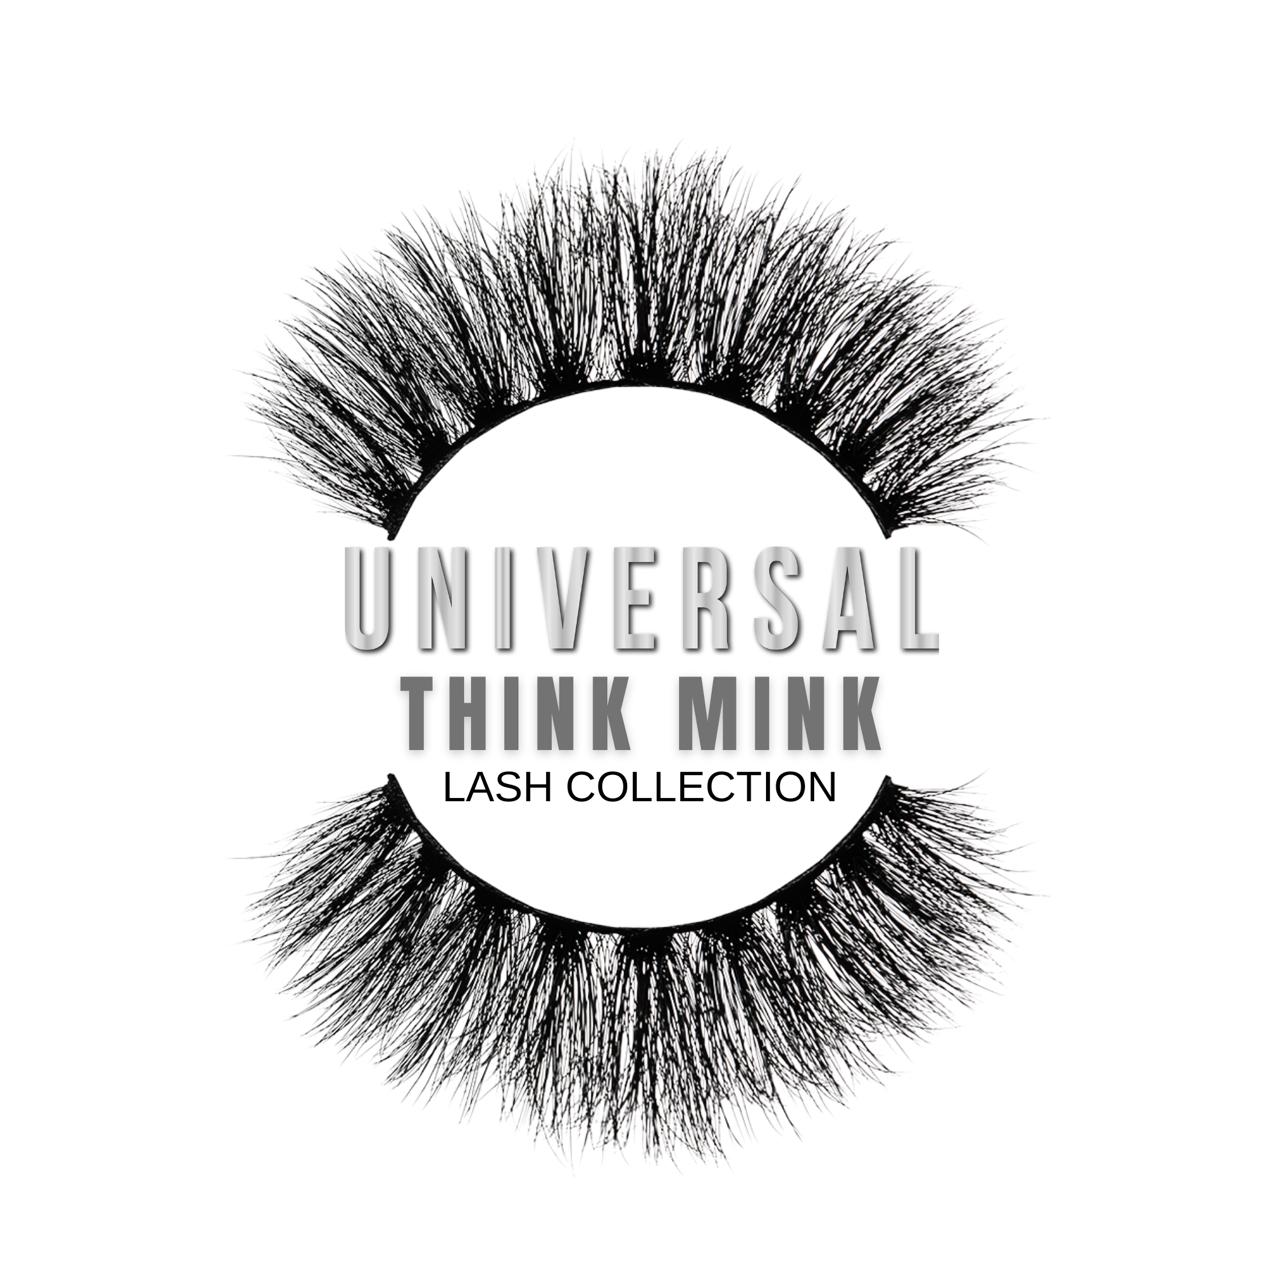 MANIFEST DREAM BIG collection (lashes not included)